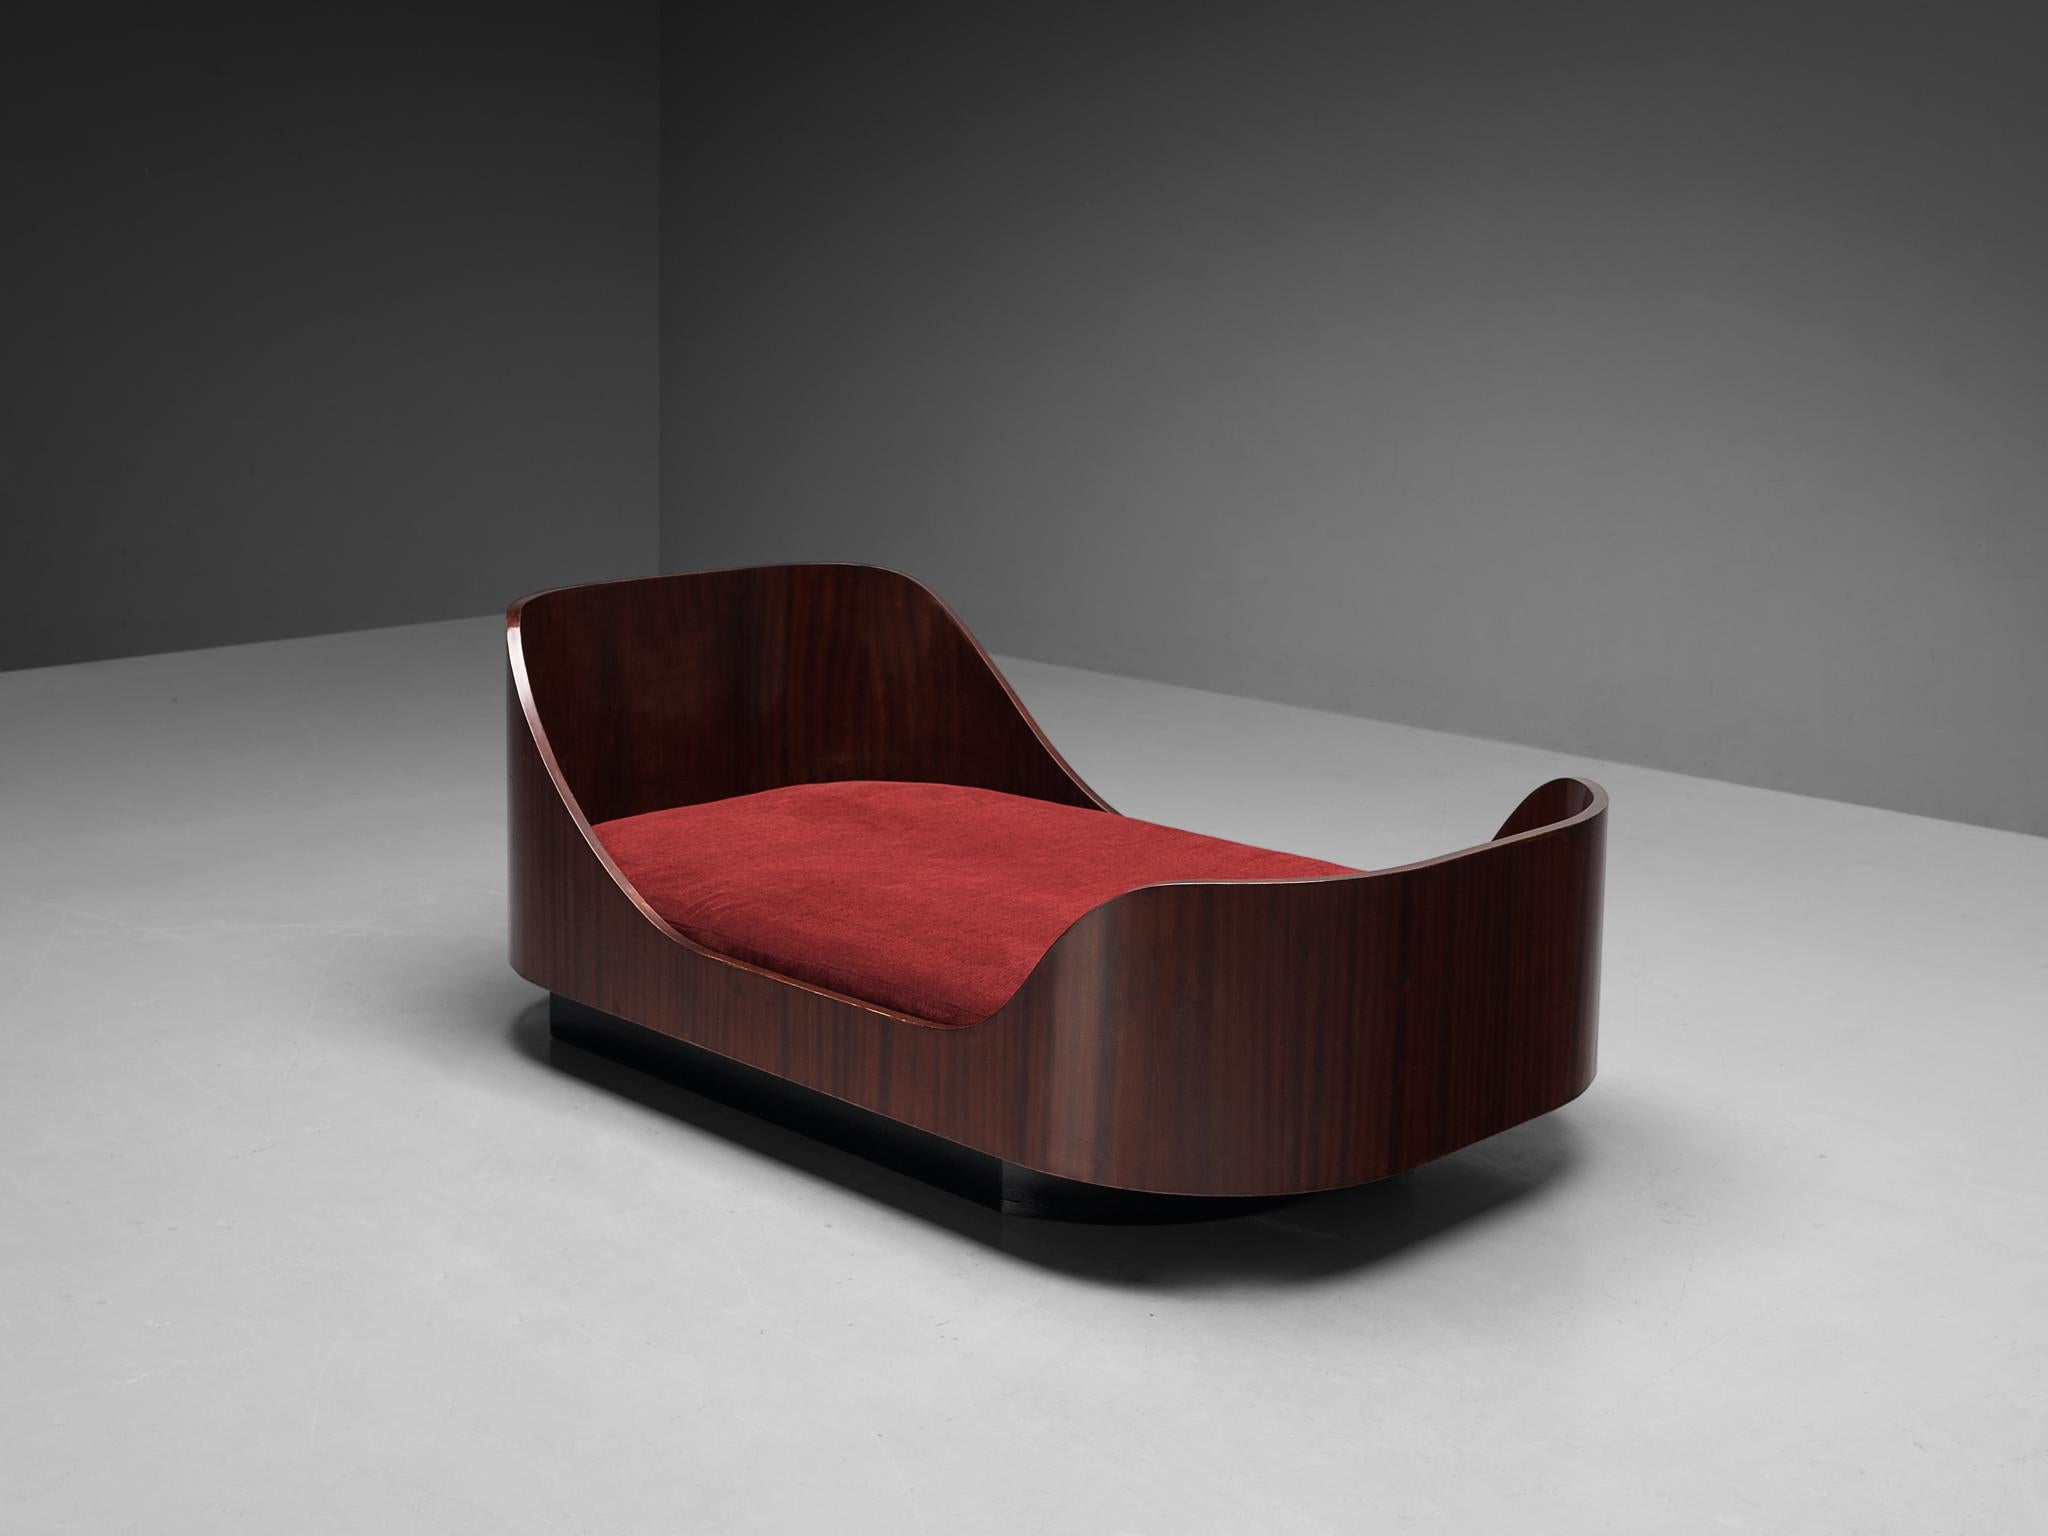 Bed / daybed, mahogany, pine, Denmark, circa. 1940 

This eloquent bed alludes to the stylistics traits of the artistic Art Deco movement of the 1940s. The design is based on a boat shaped construction featuring a high headboard and footboard as